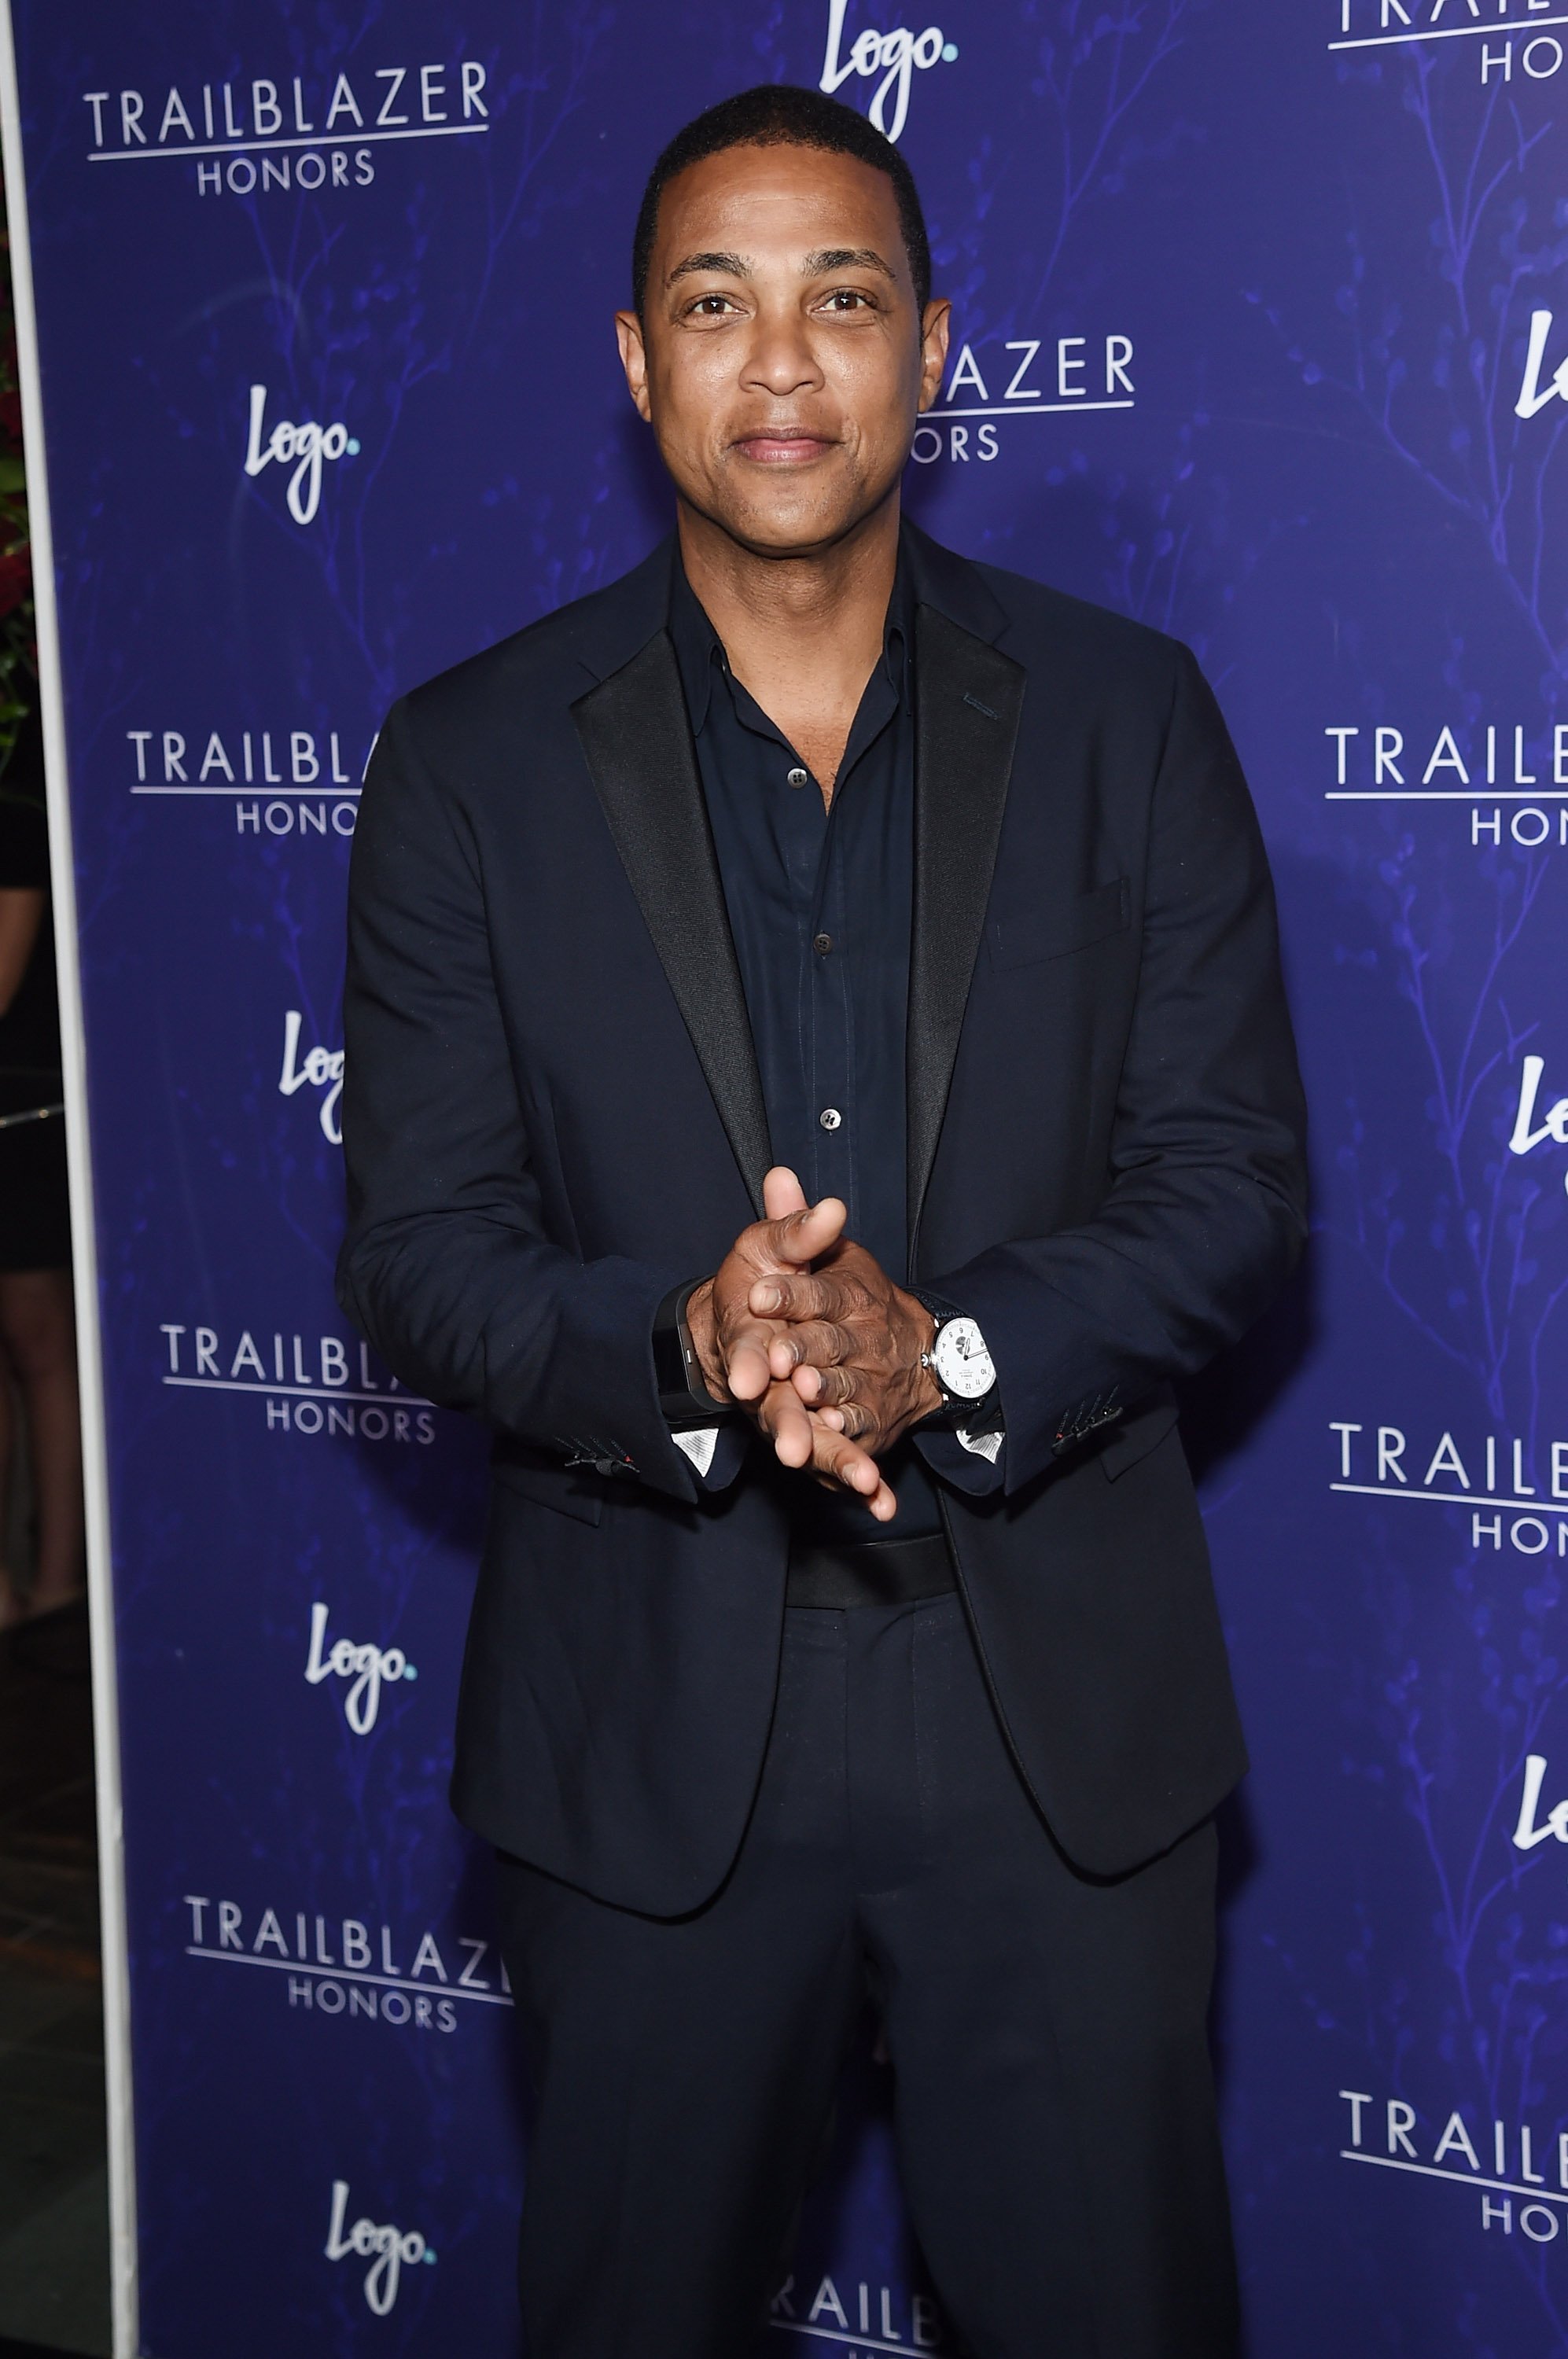 Don Lemon attends the Logo's Trailblazer Honors event in New York City on June 22, 2017 | Photo: Getty Images